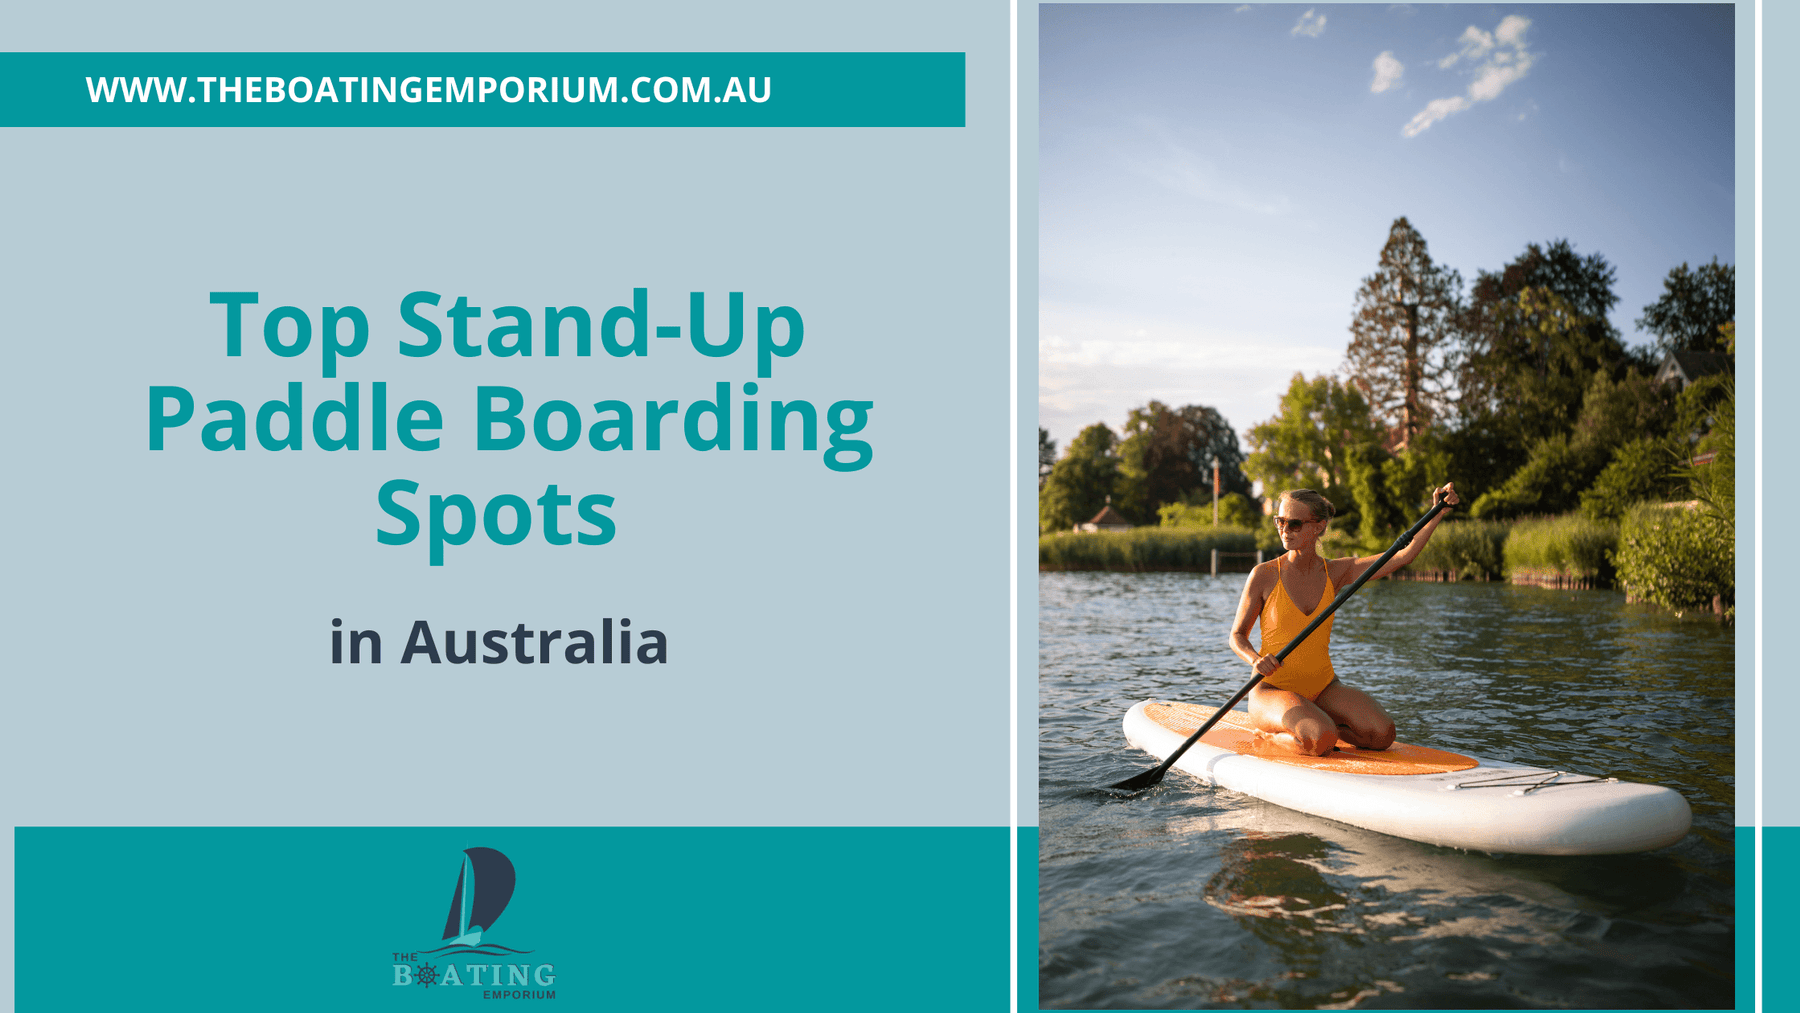 Top Stand-Up Paddleboarding Spots in Australia - The Boating Emporium